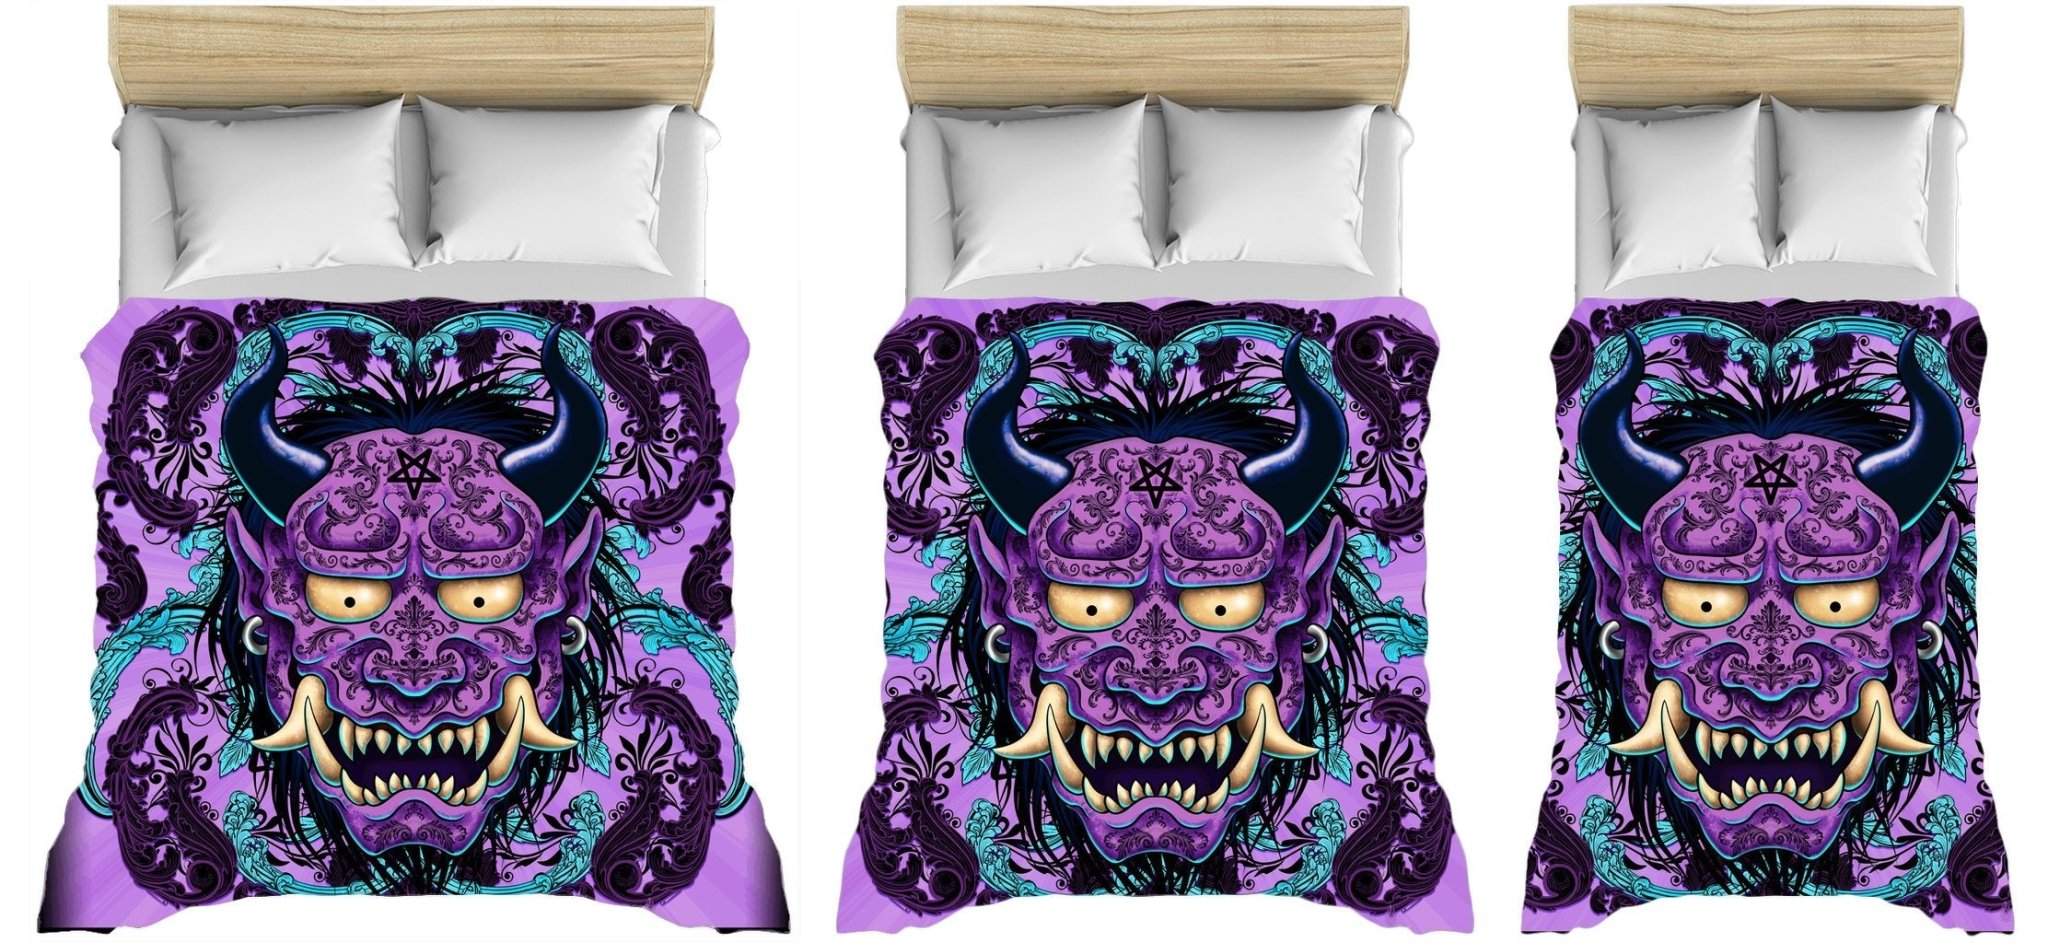 Pastel Goth Bedding Set, Comforter and Duvet, Fantasy Bed Cover and Bedroom Decor Japanese Demon, King, Queen and Twin Size - Purple Oni - Abysm Internal